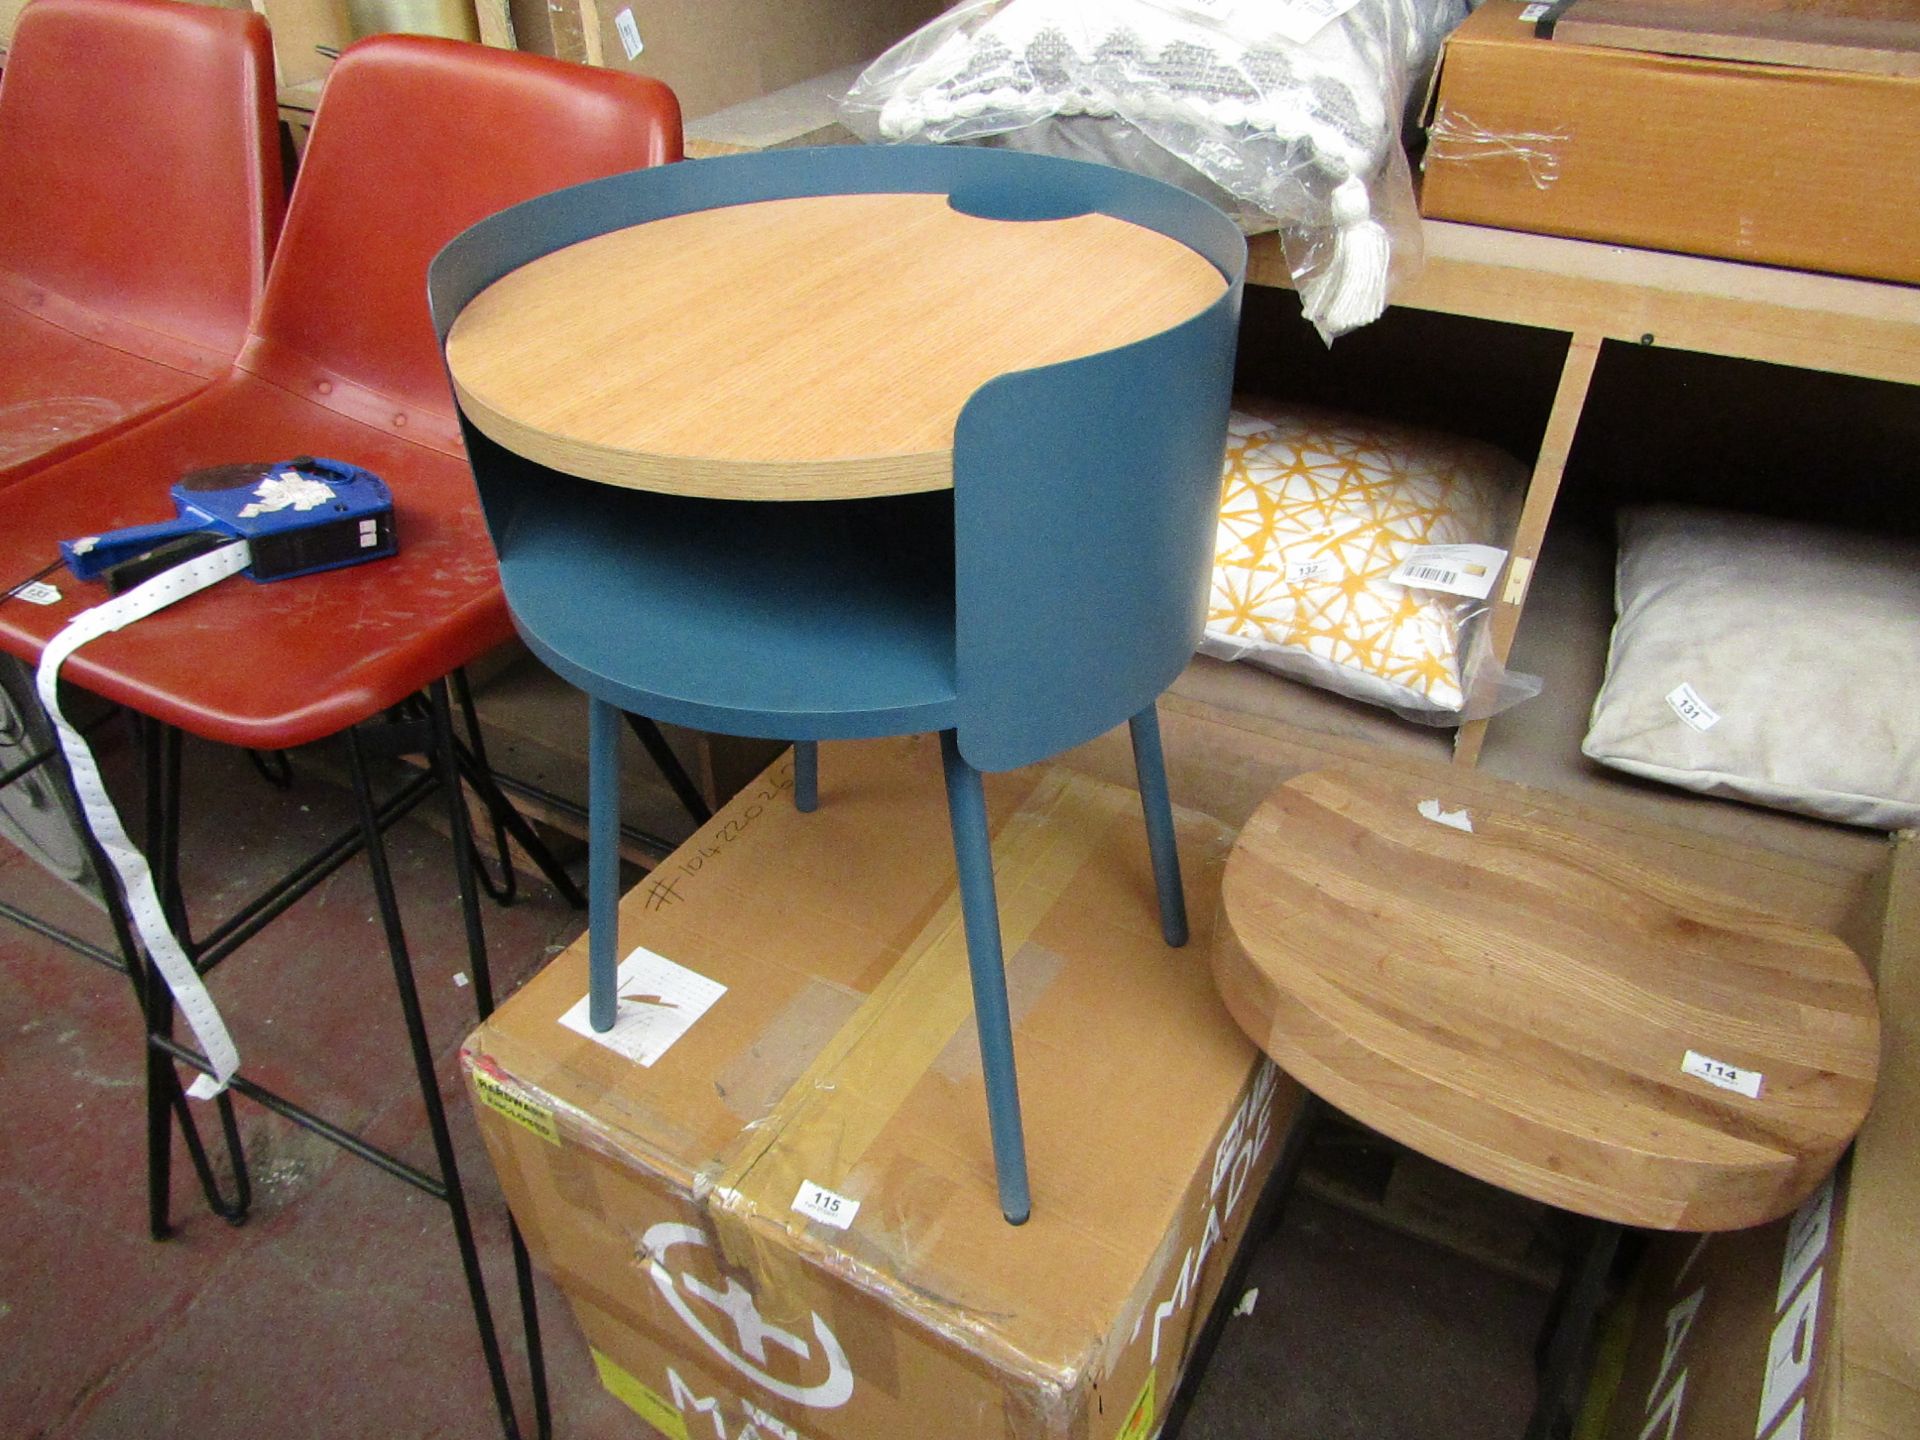 1 x Made.com MADE Essentials Ooty Bedside Table Teal RRP œ99 SKU MAD-STBOOT002BLU-UK TOTAL RRP œ99